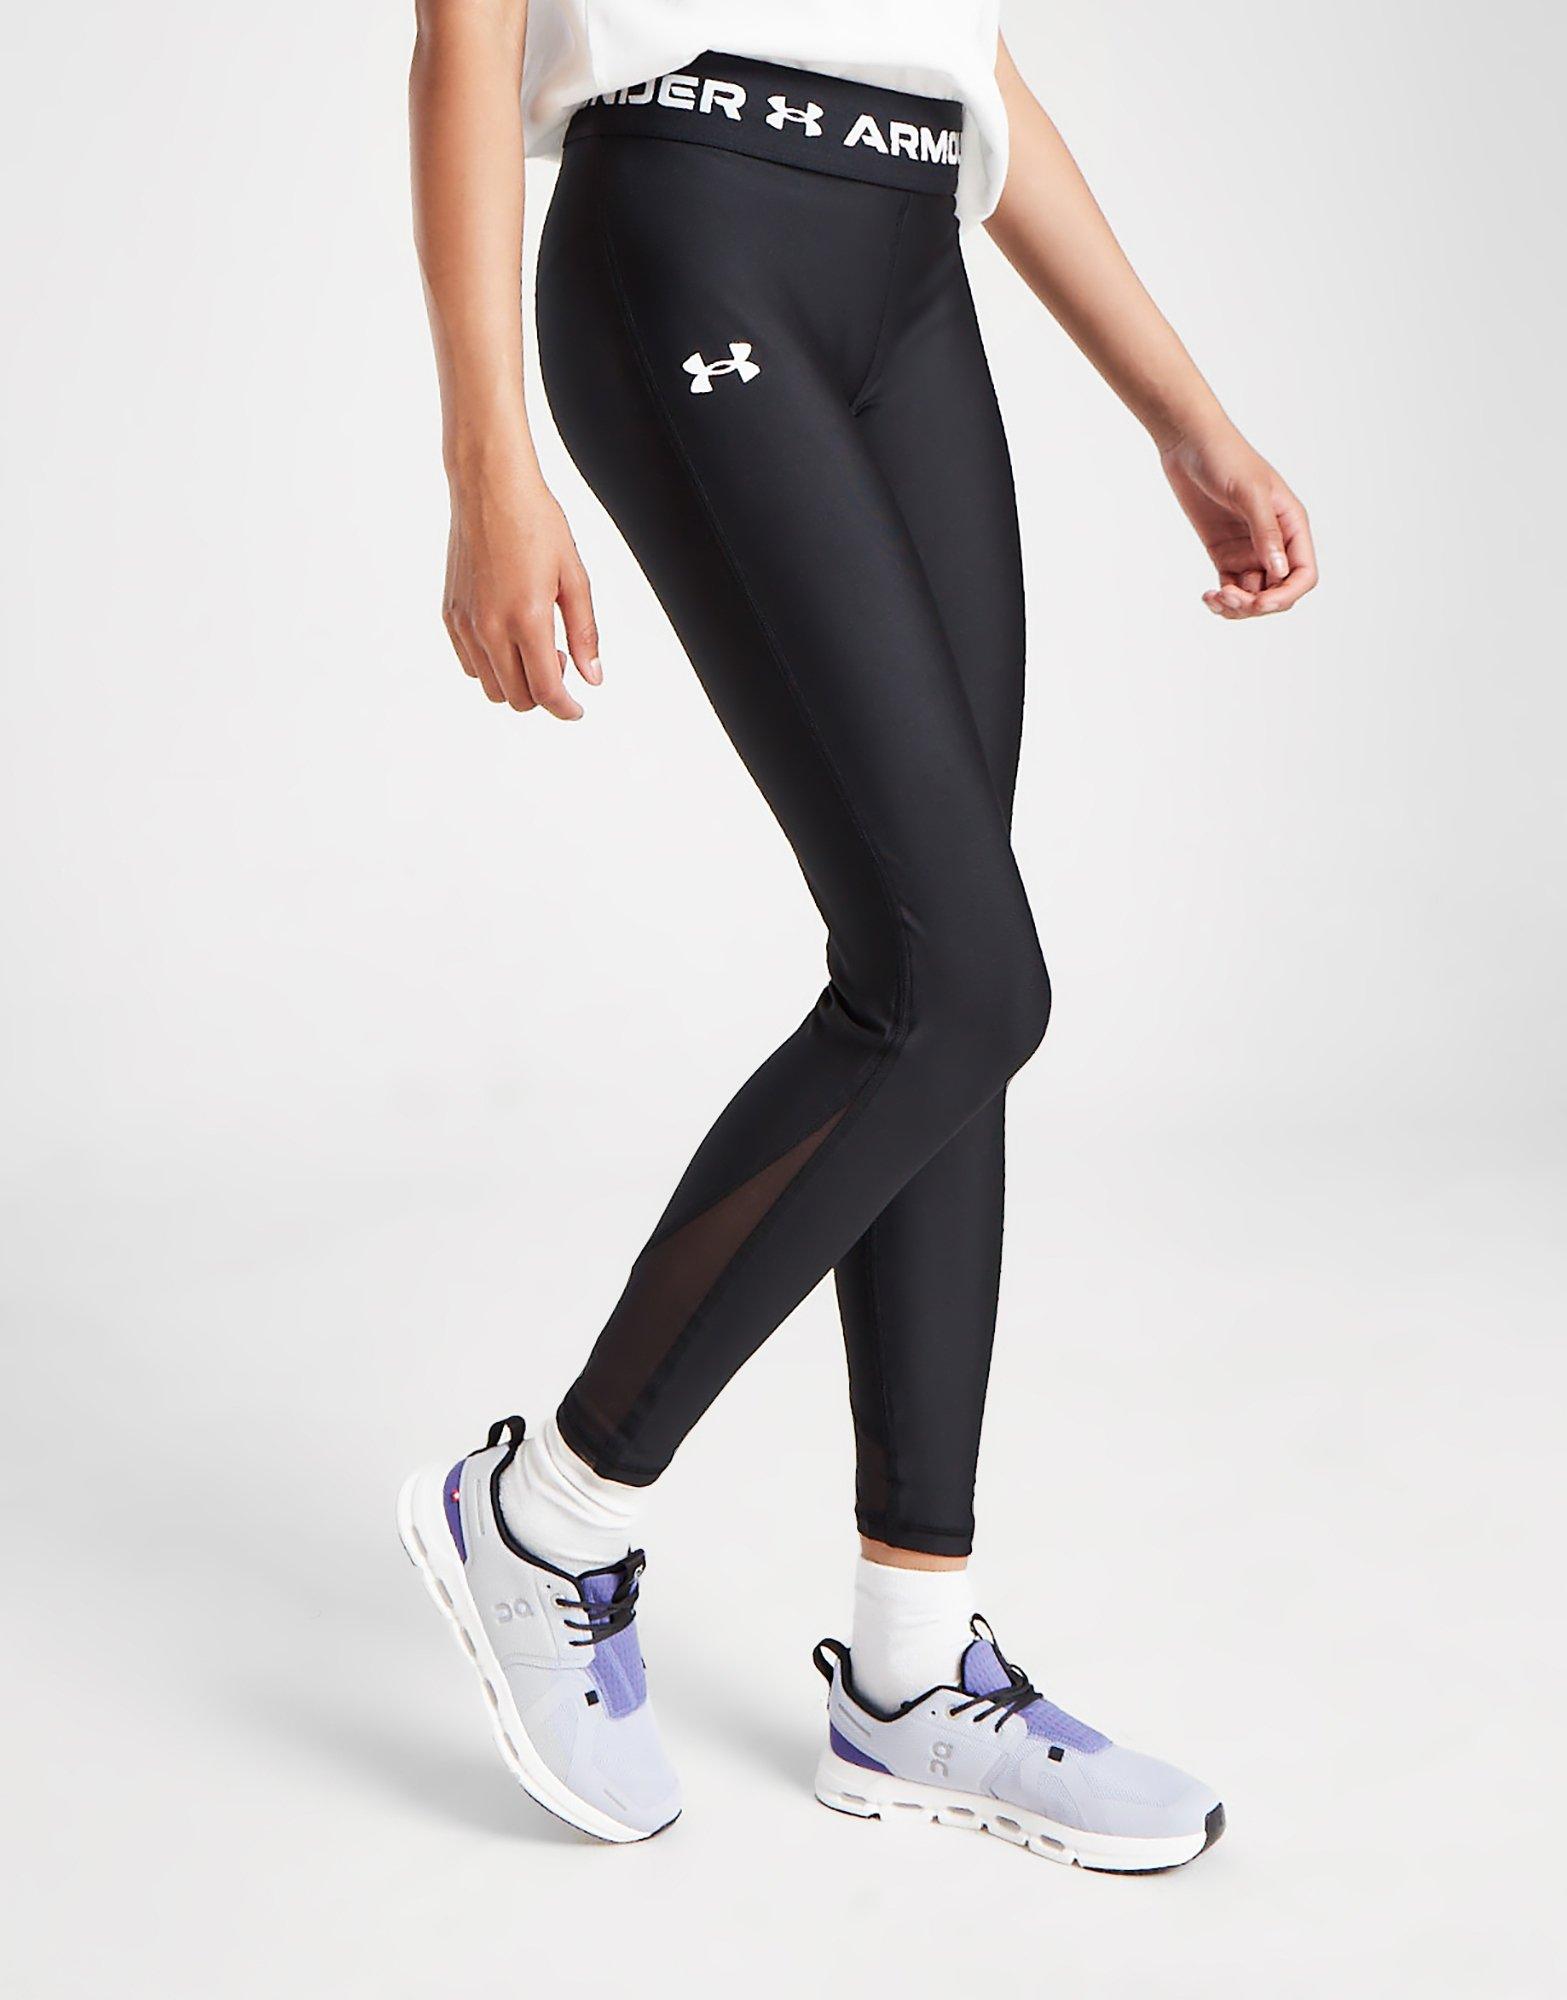 Black Under Armour Girls' Fitness Armour Tights Junior